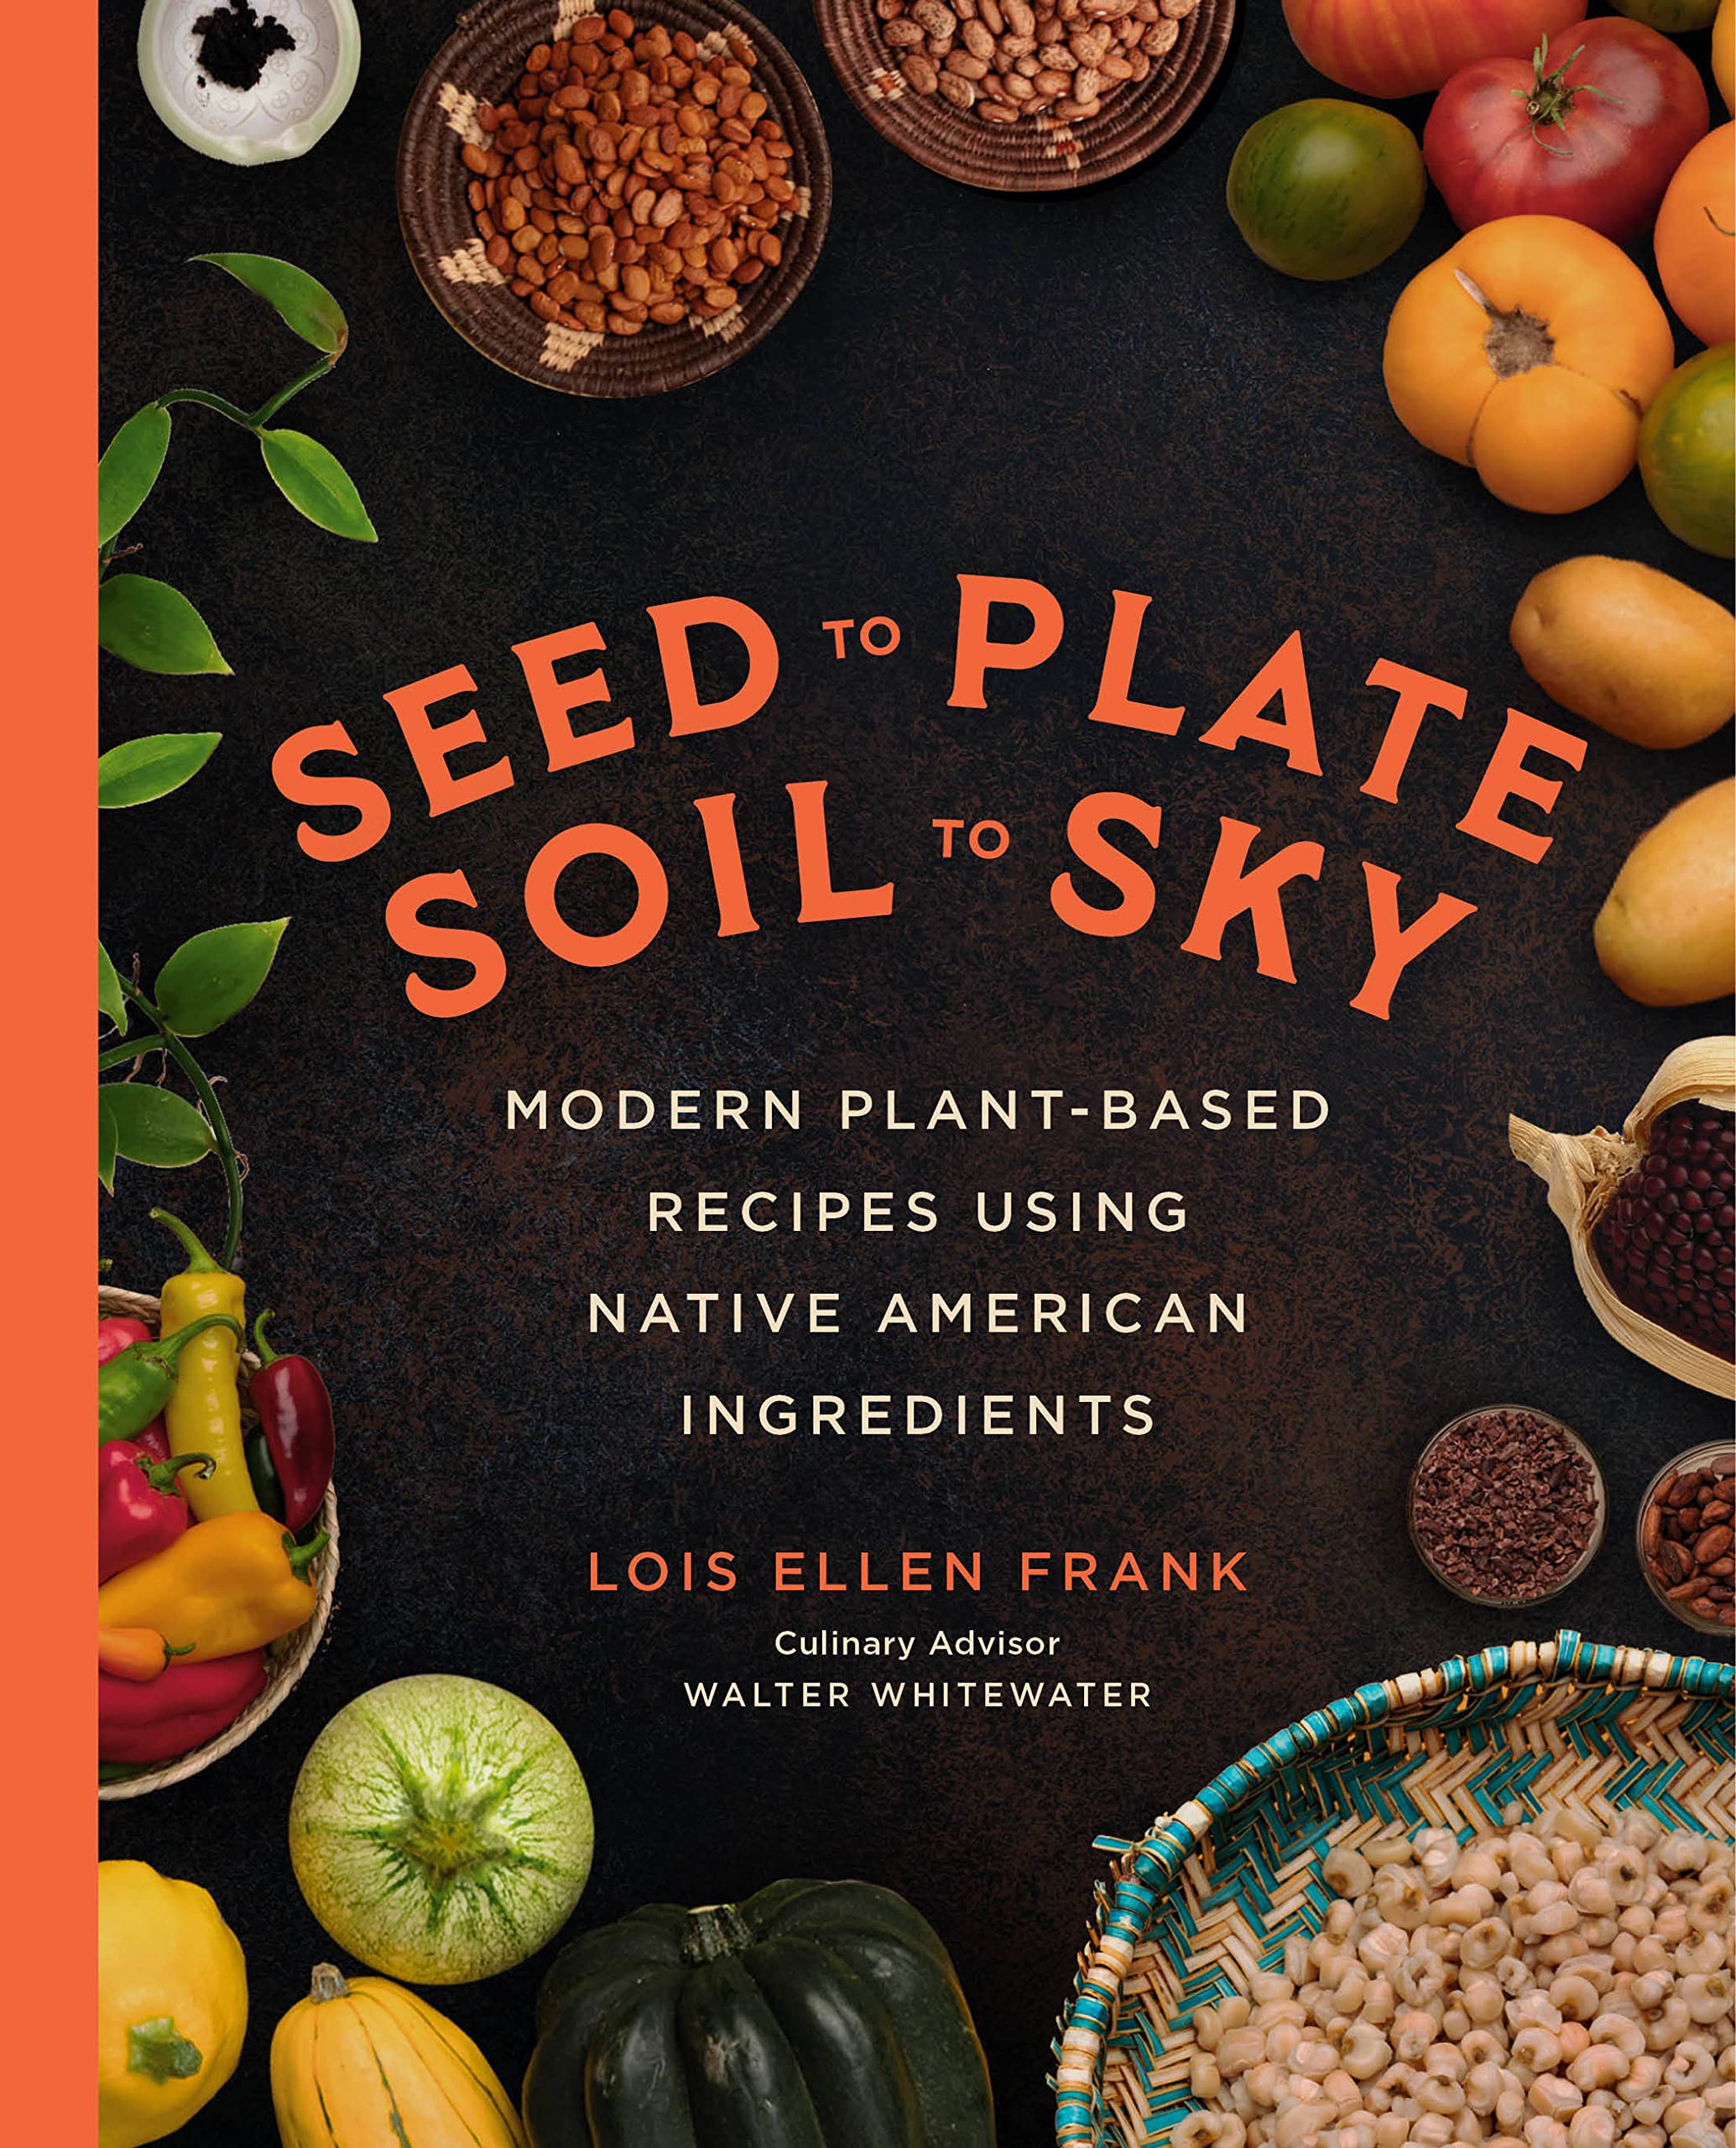 Seed to Plate, Soil to Sky: Modern Plant-Based Recipes Using Native American Ingredients (Lois Ellen Frank)